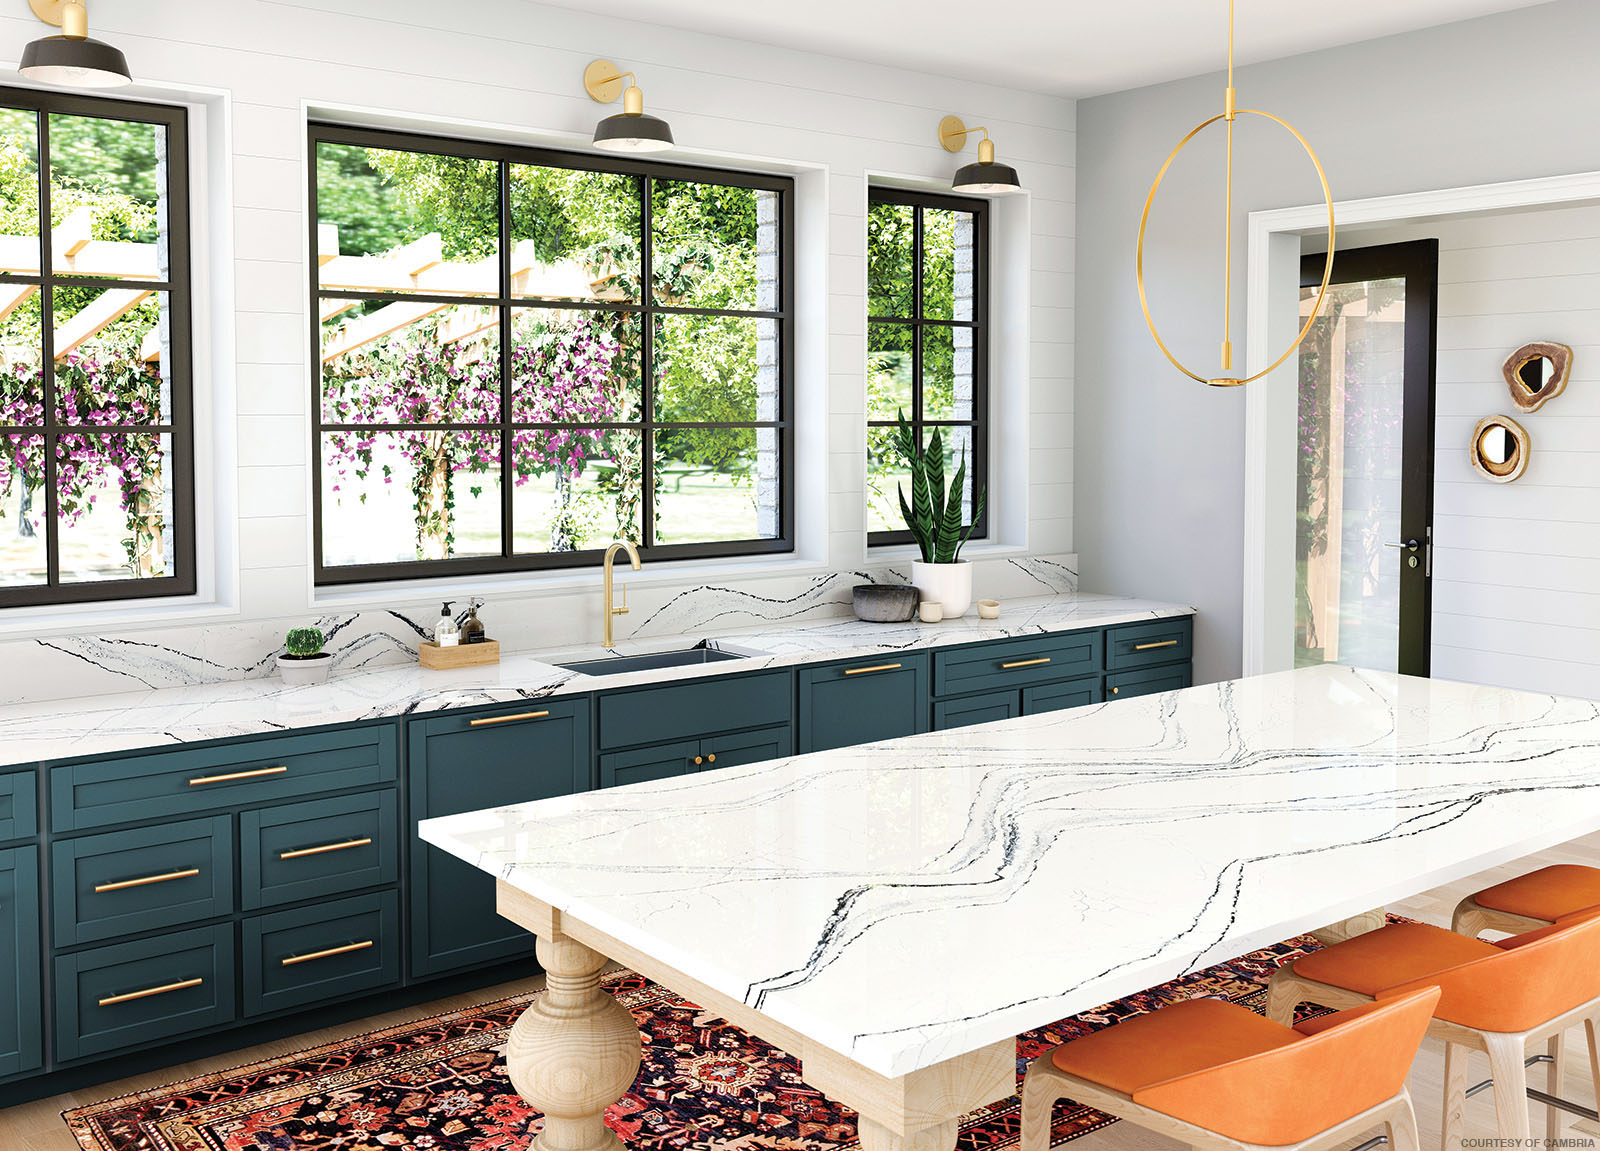 20 Kitchen Design Trends You Ll See This Year